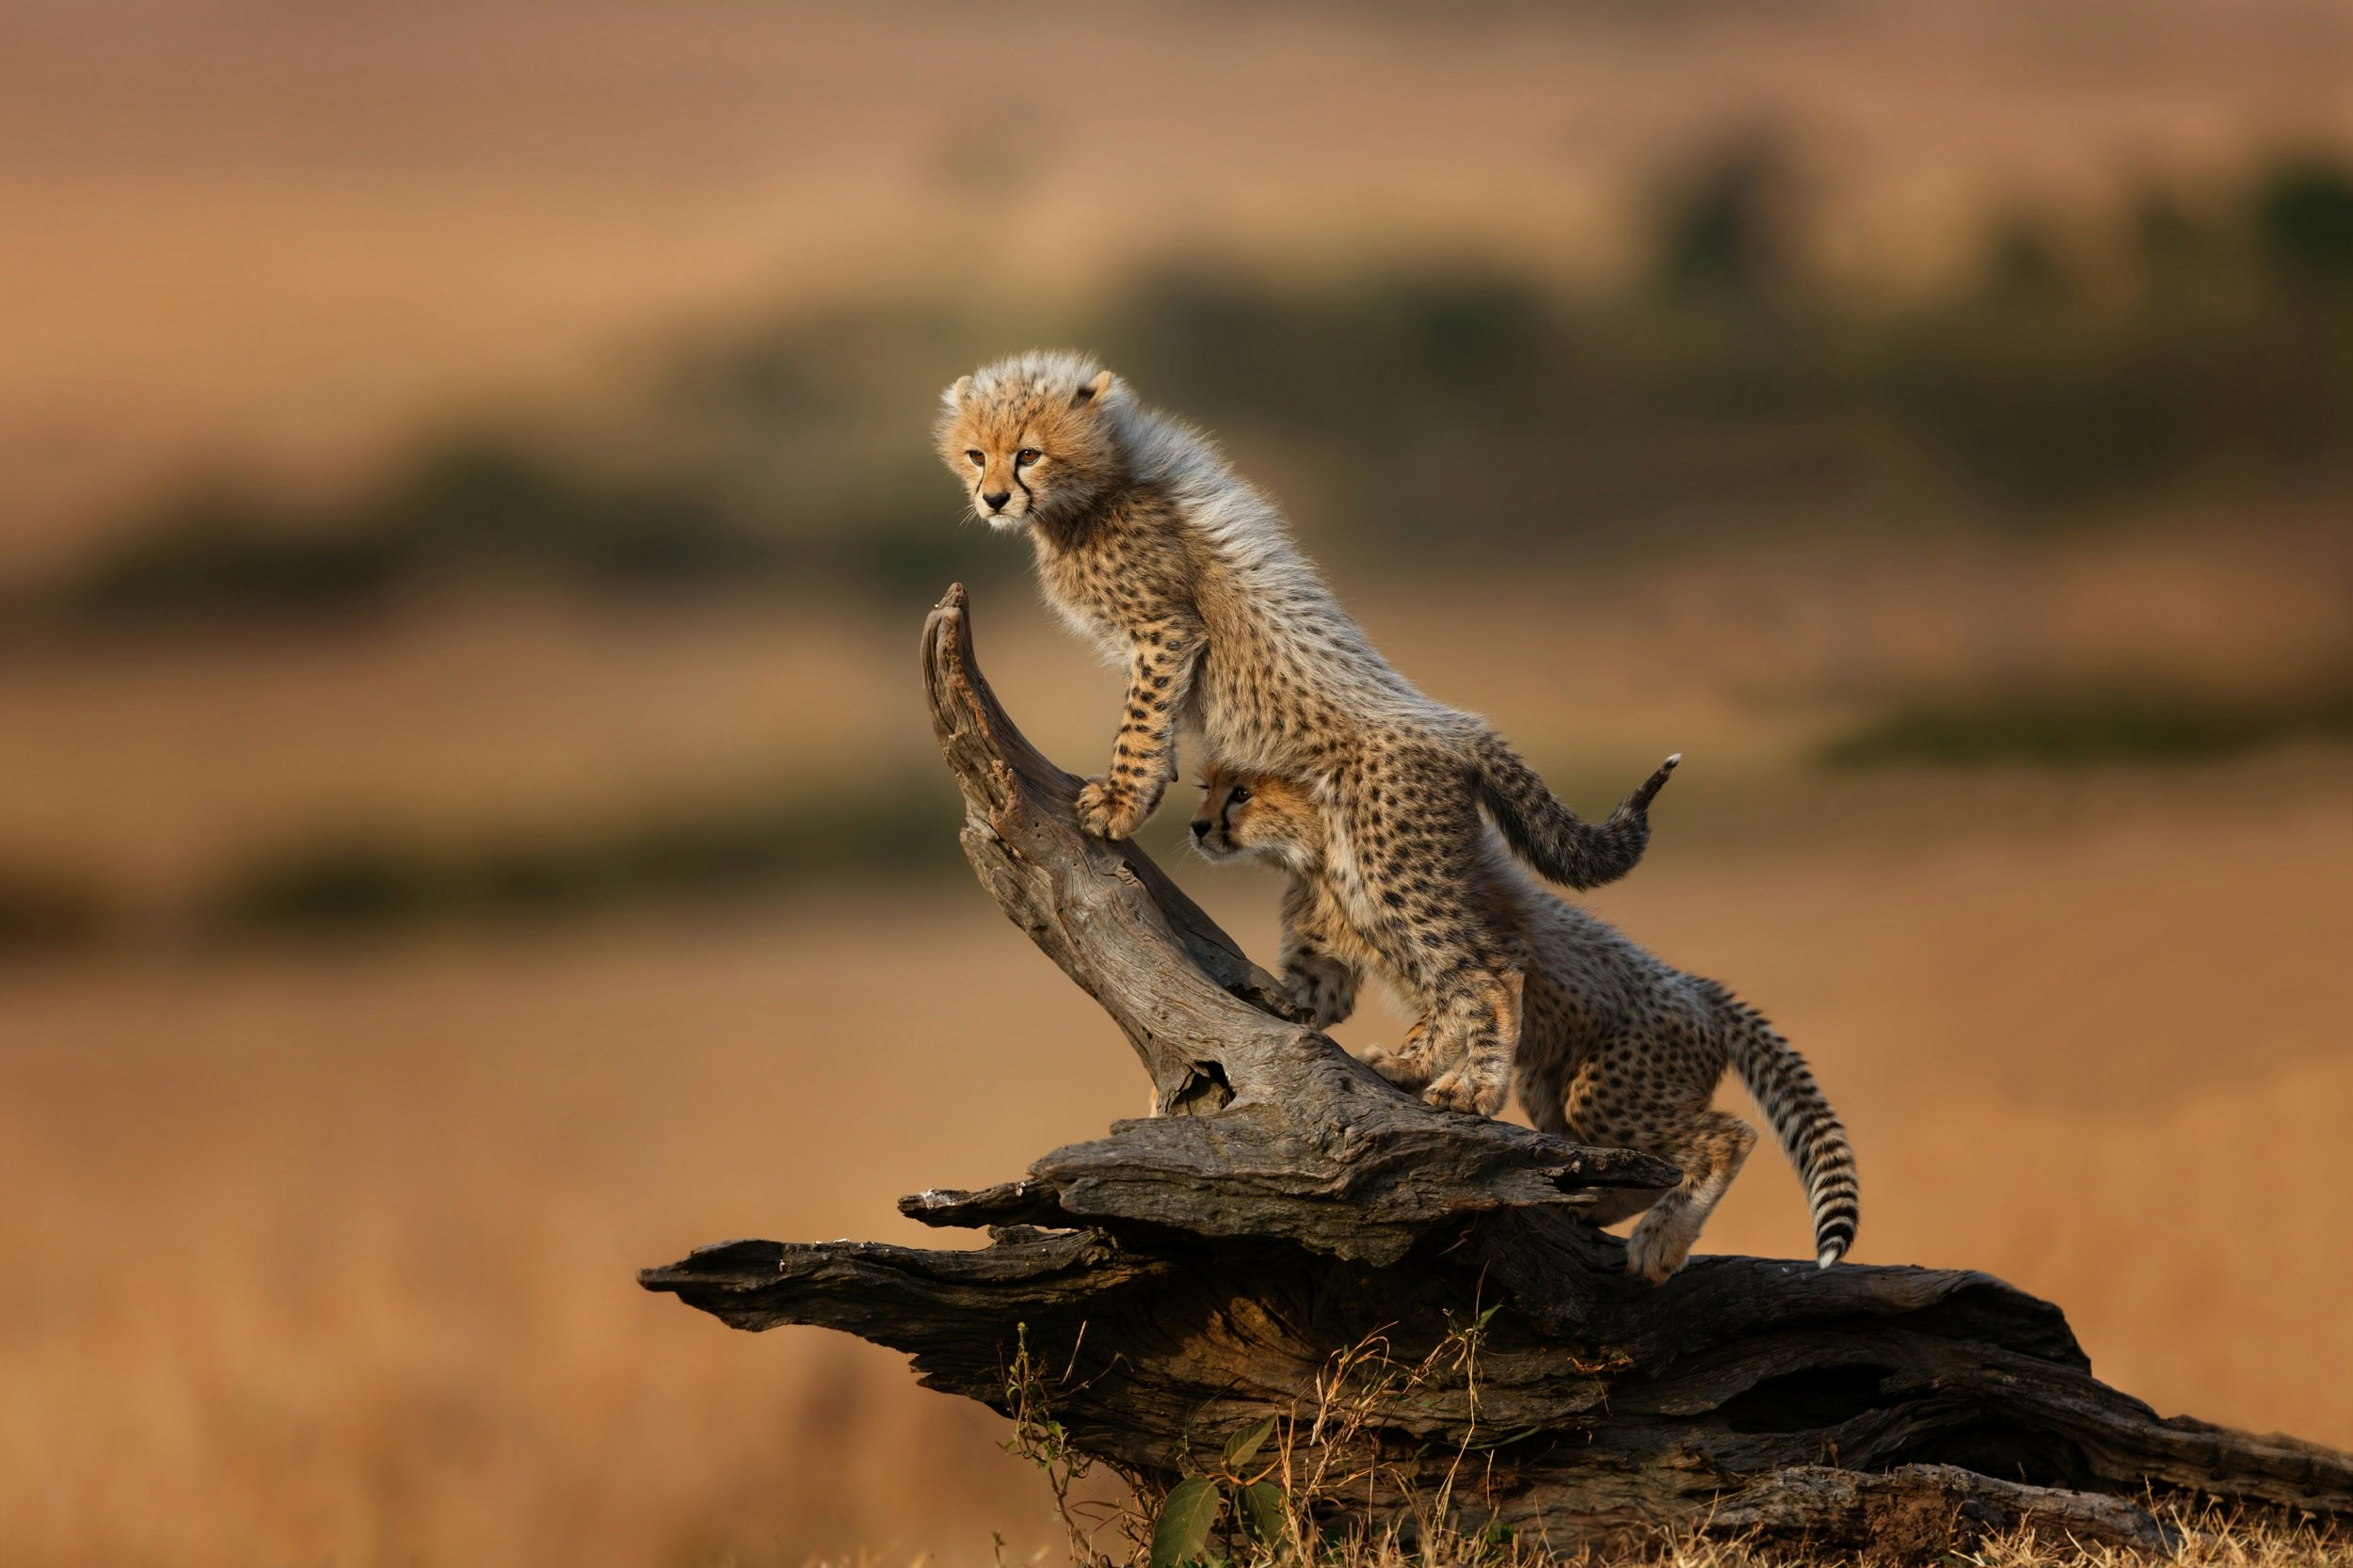 Two small cheetah cubs climbing up the skeleton of an old overturned tree; one looks intently  into the distance, while the second one scrunches up beneath the belly of the other.